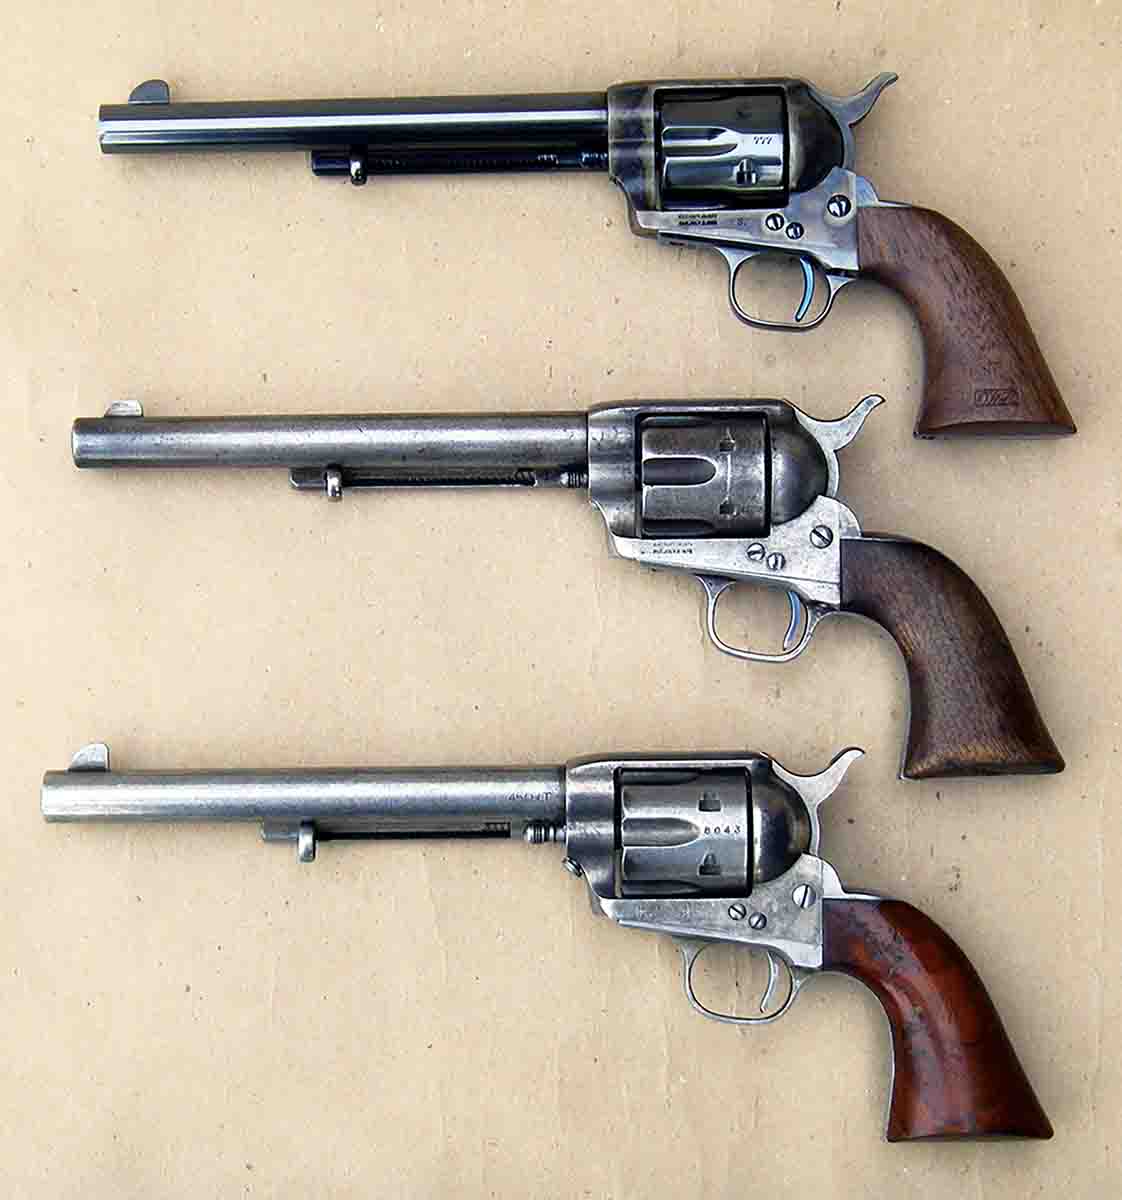 Top to bottom: An original “US” marked Colt Single Action Army manufactured in 1873 (restored), a heavily used Colt Single Action Army manufactured in 1876 and a Uberti/Cimarron Model P Original Finish.